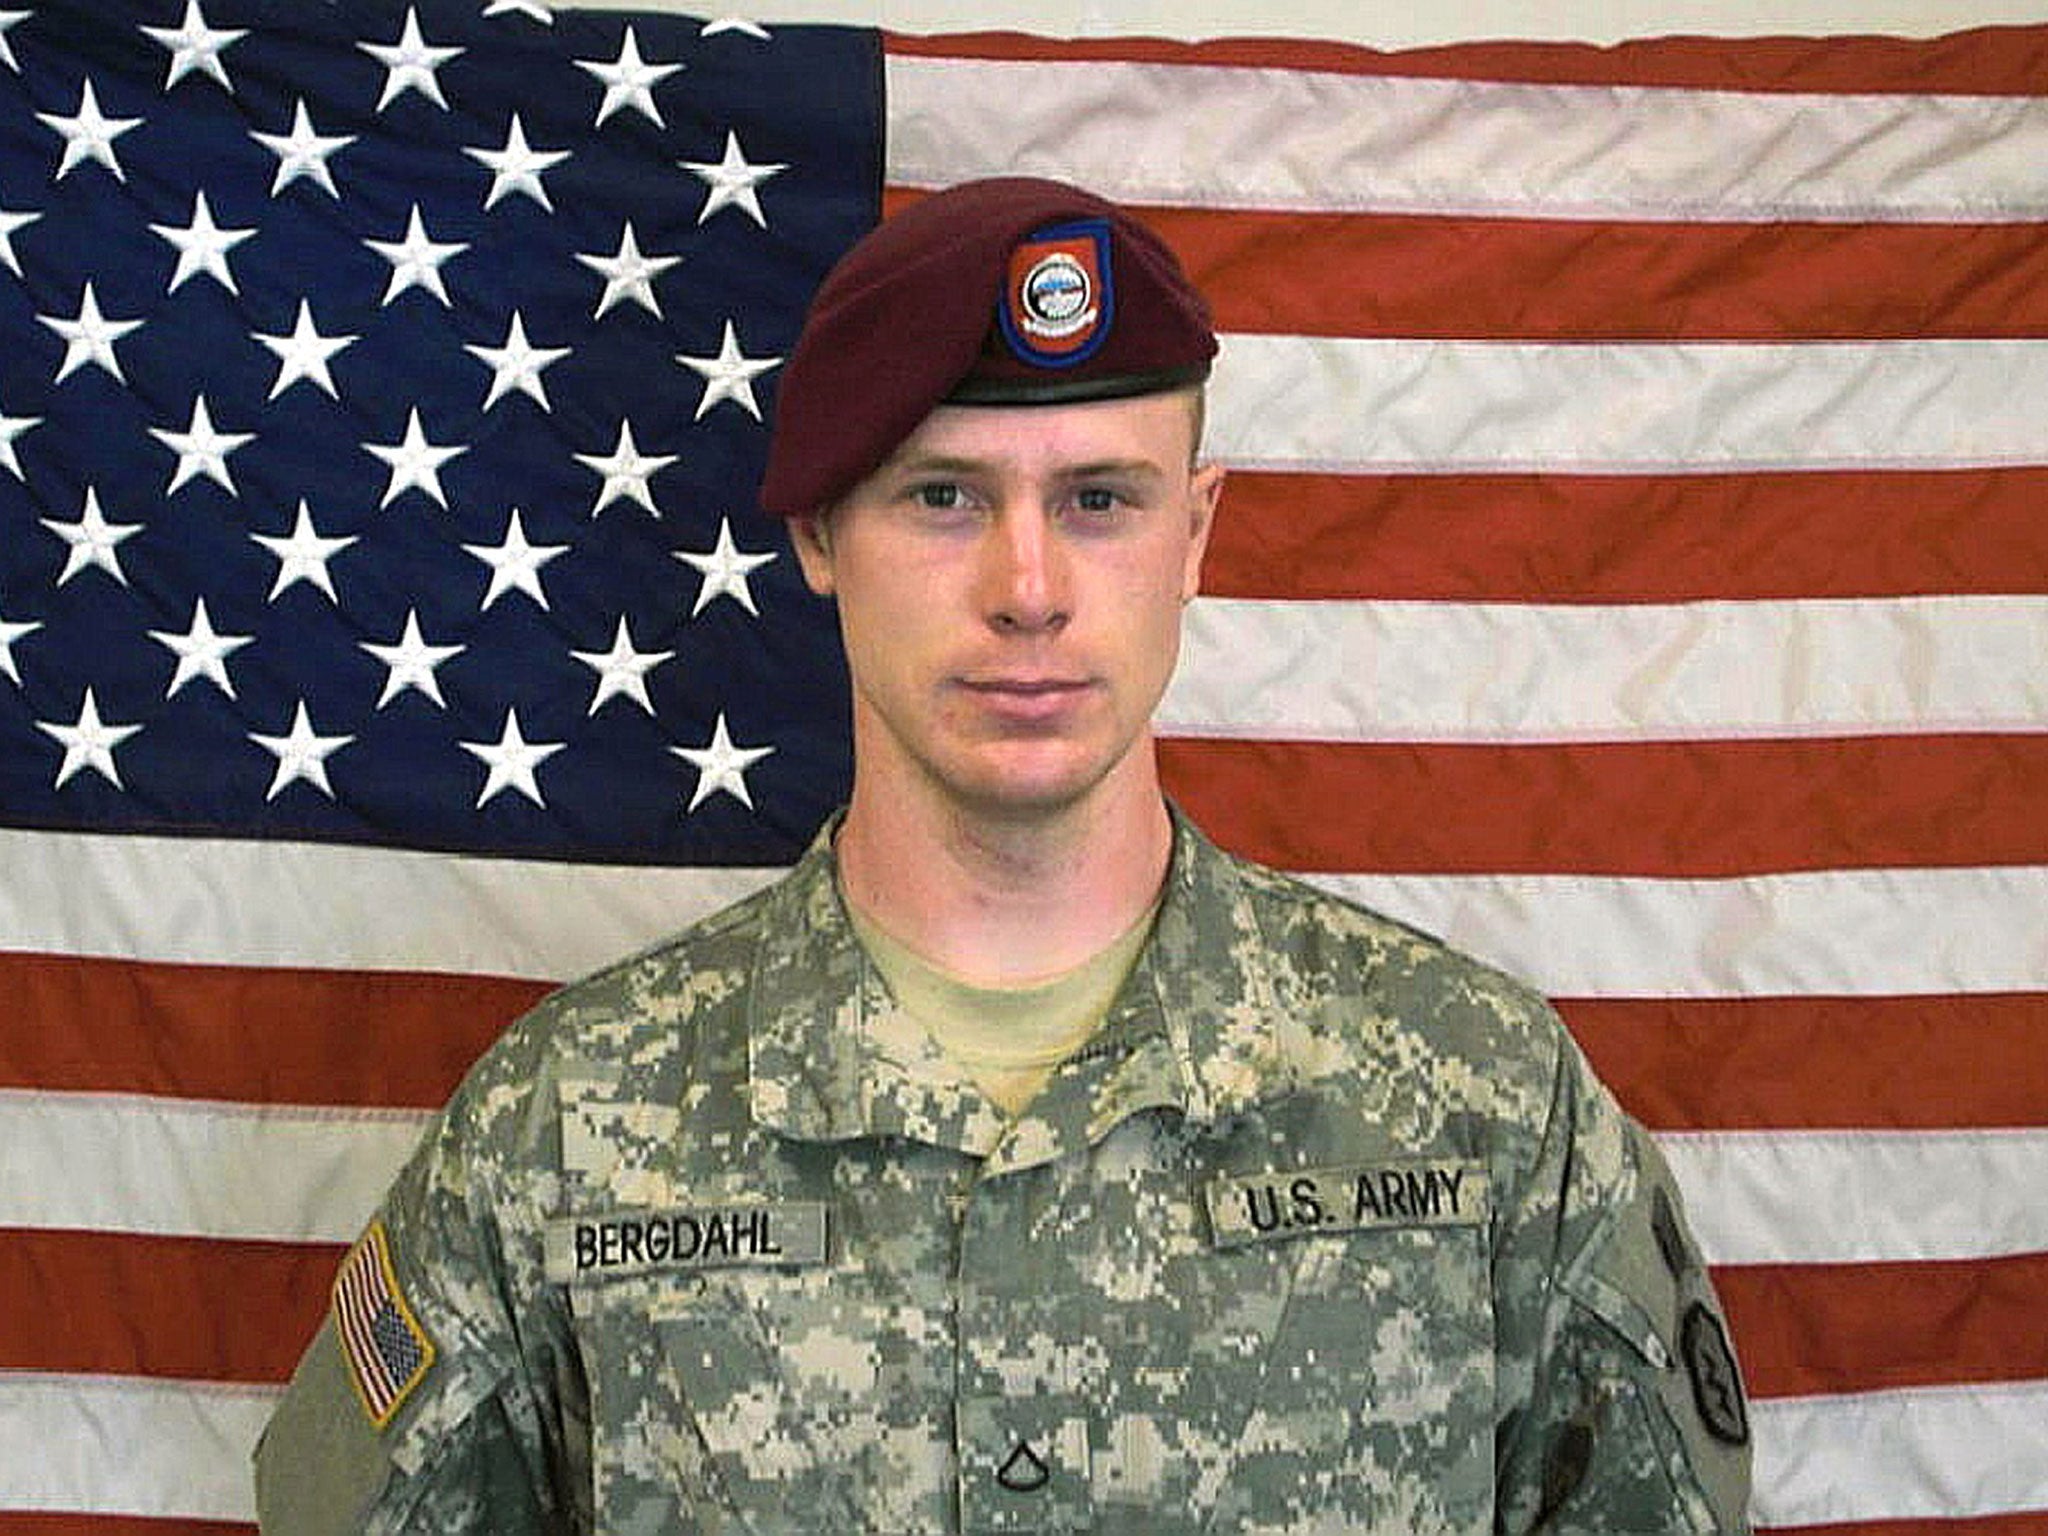 Bowe Bergdahl walked away from his army post in Afghanistan in 2005 and went missing in the desert